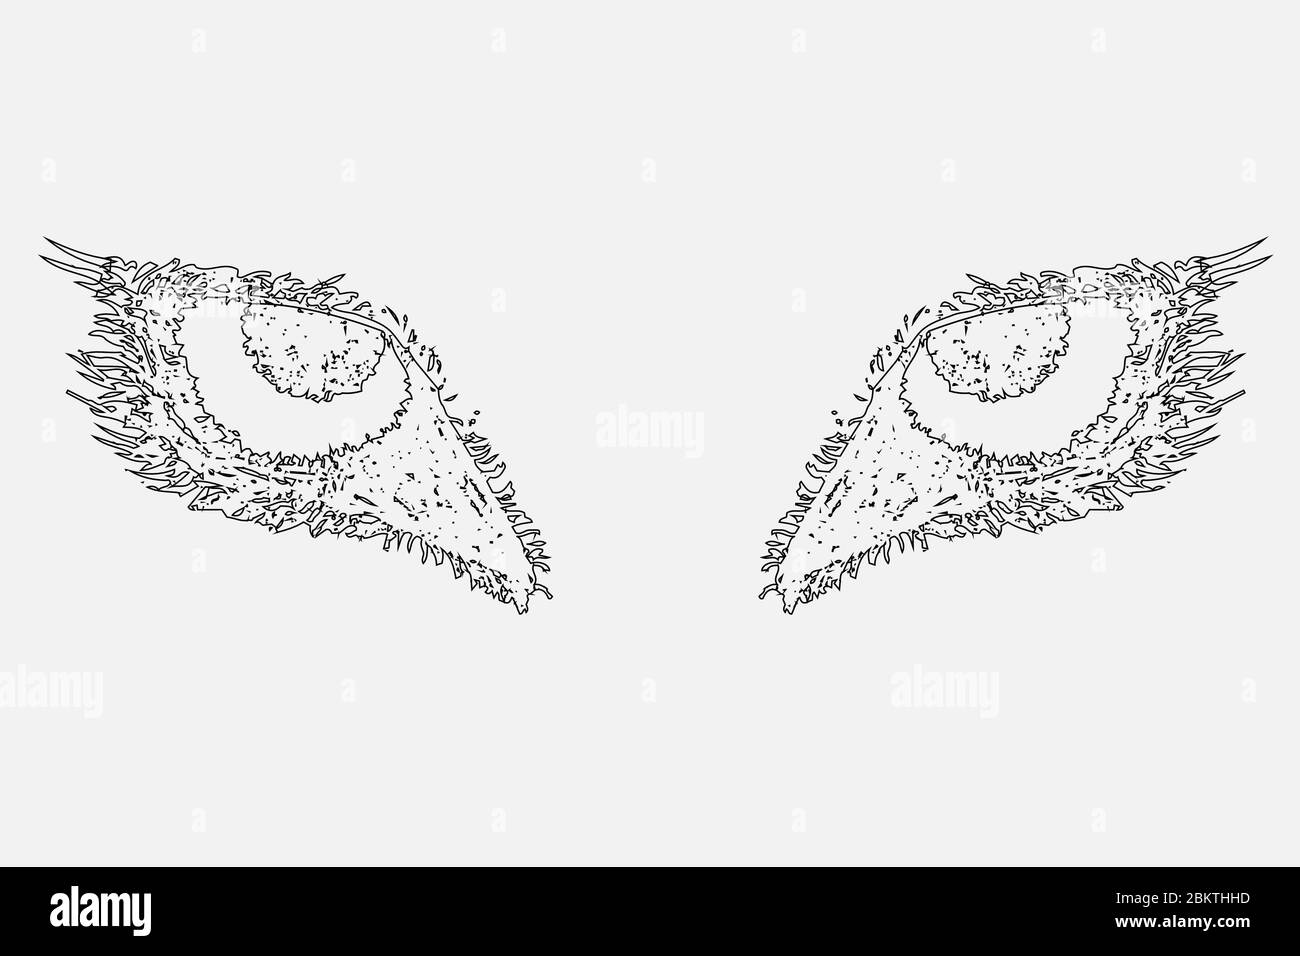 The eyes of a wild animal drawn by hand.  Stock Vector